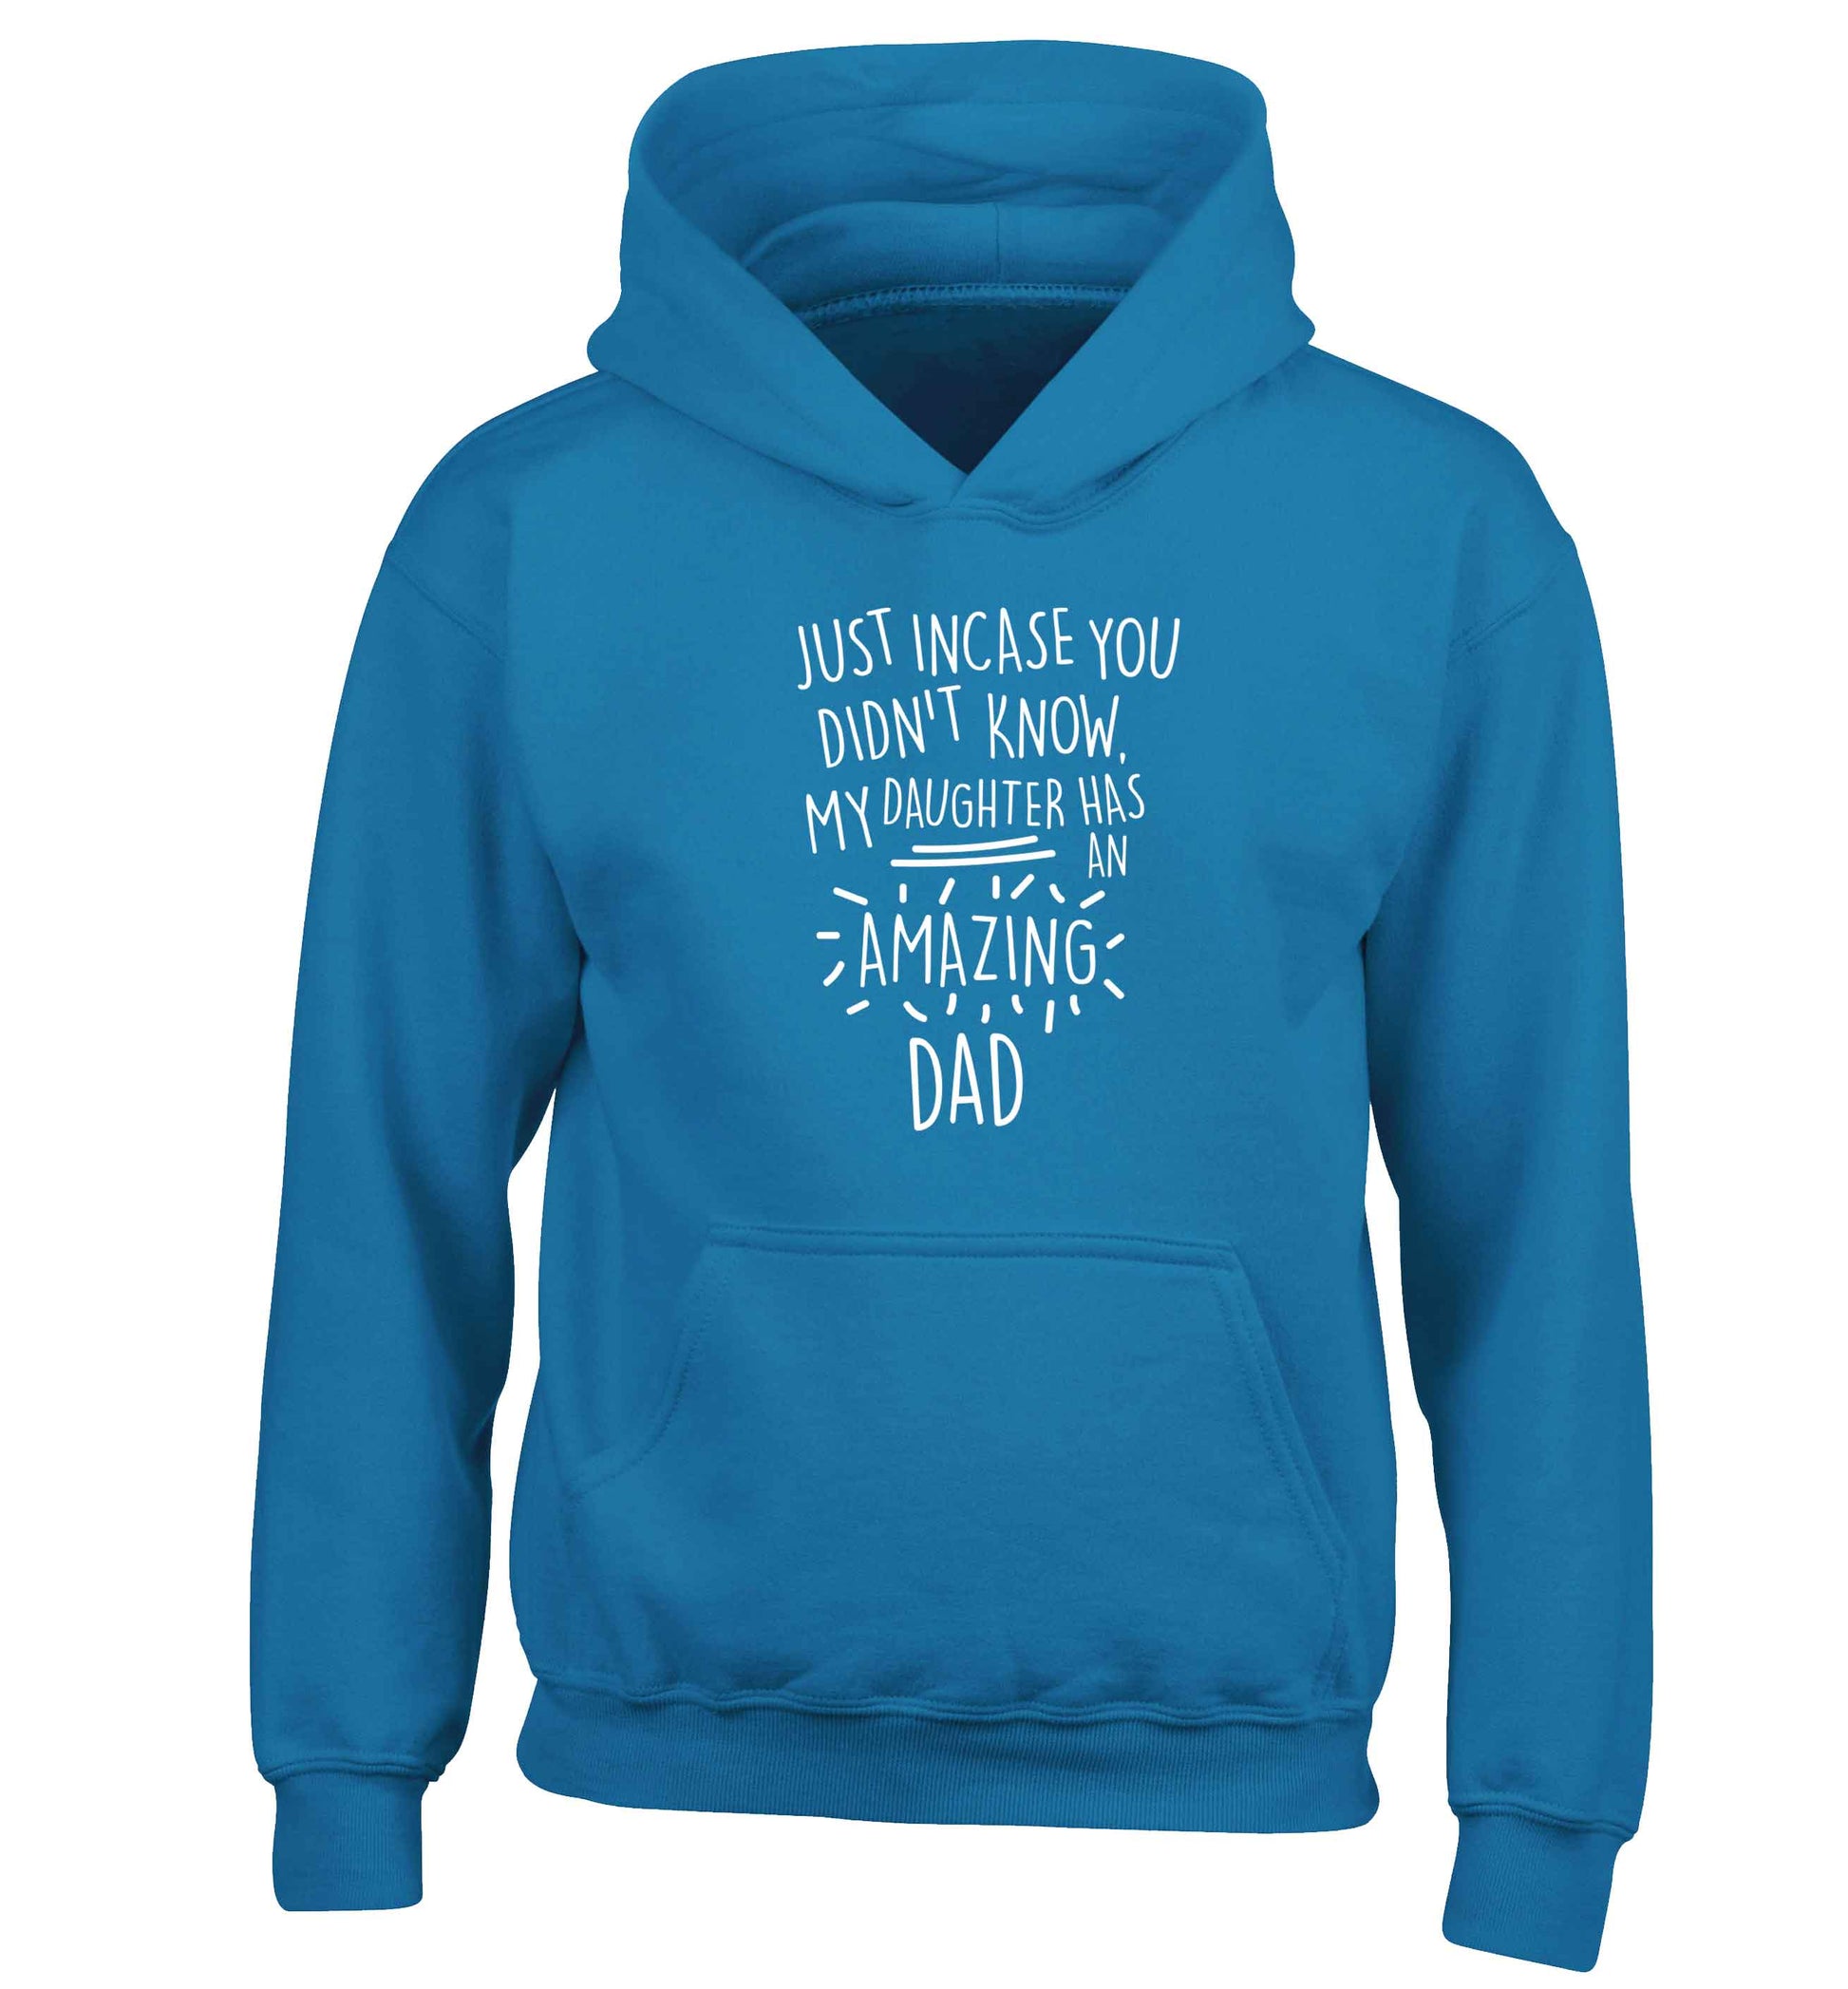 Just incase you didn't know my daughter has an amazing dad children's blue hoodie 12-13 Years